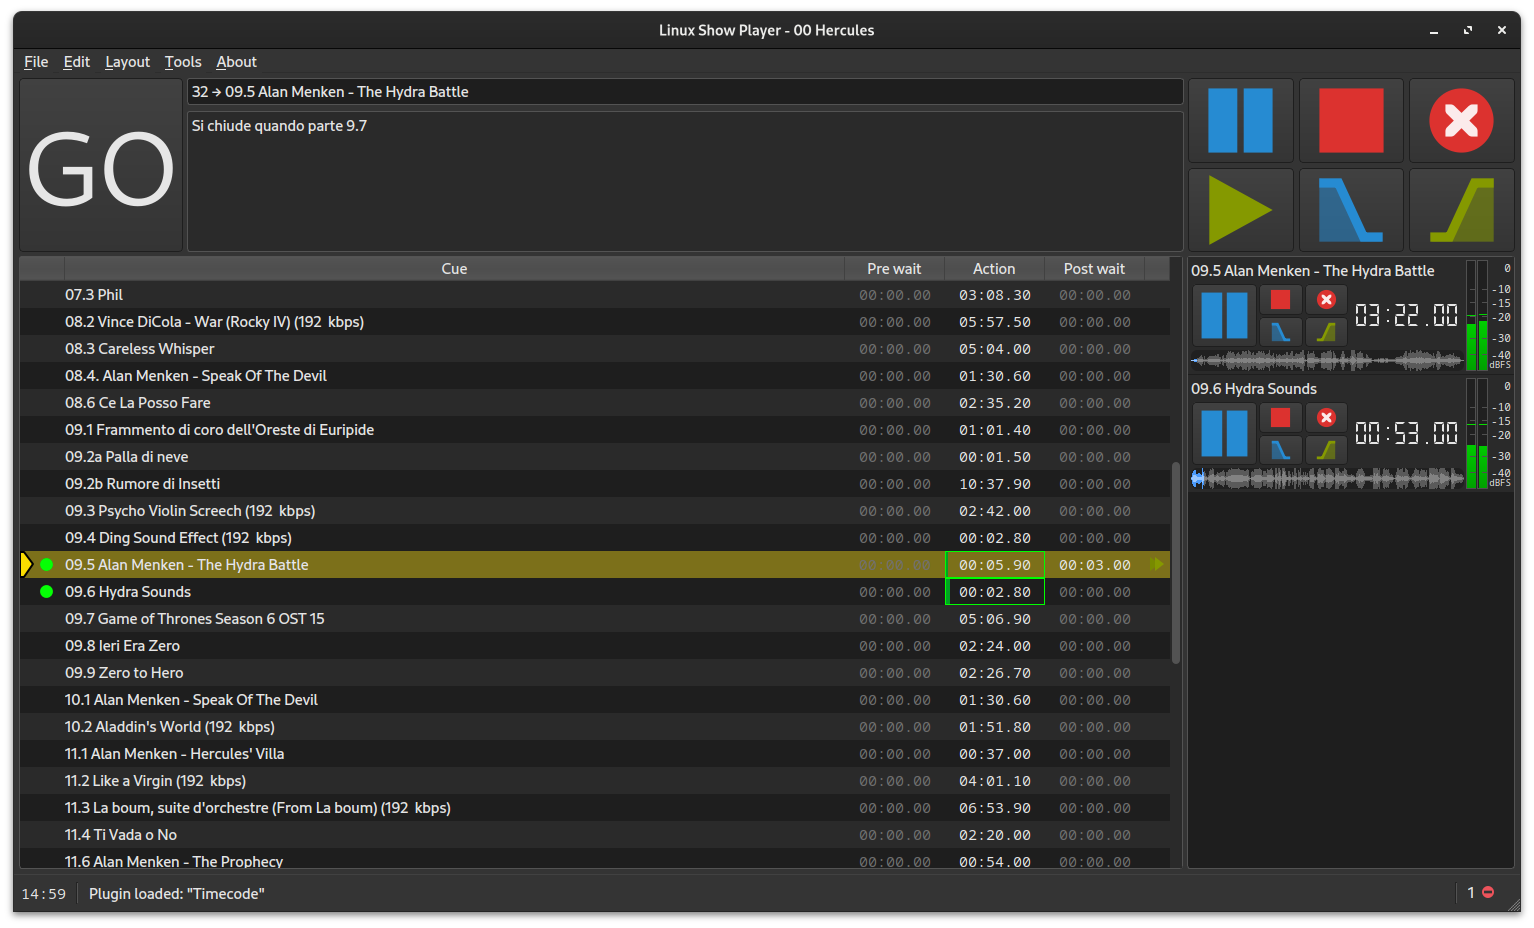 Linux Show Player - List Layout